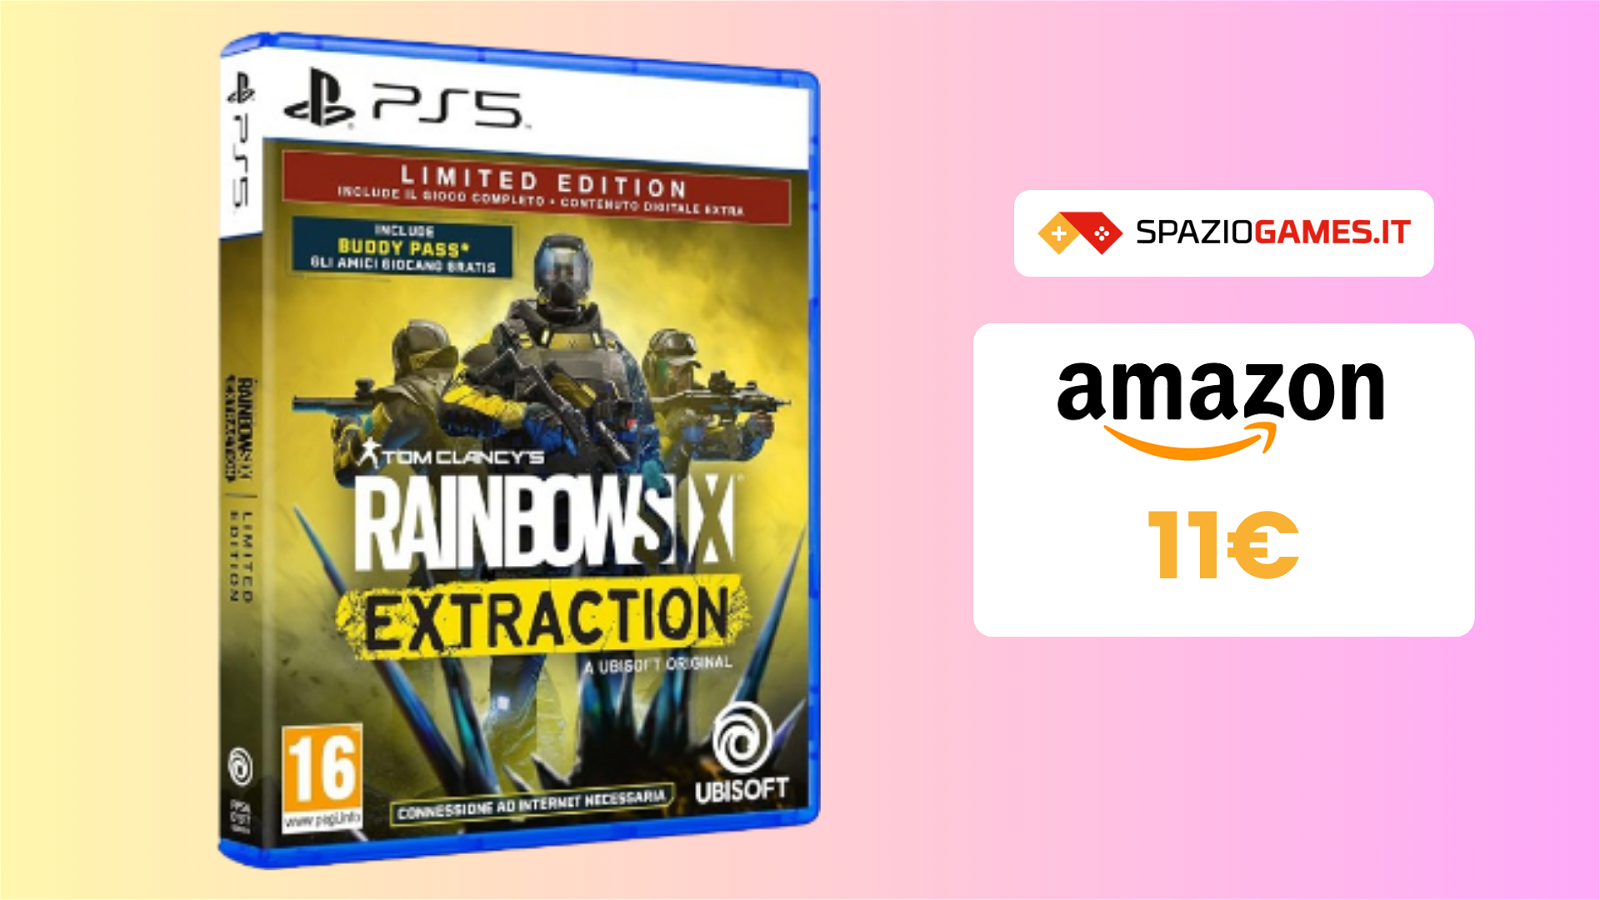 SOLO 11€ per Rainbow Six Extraction per PS5? WOW!